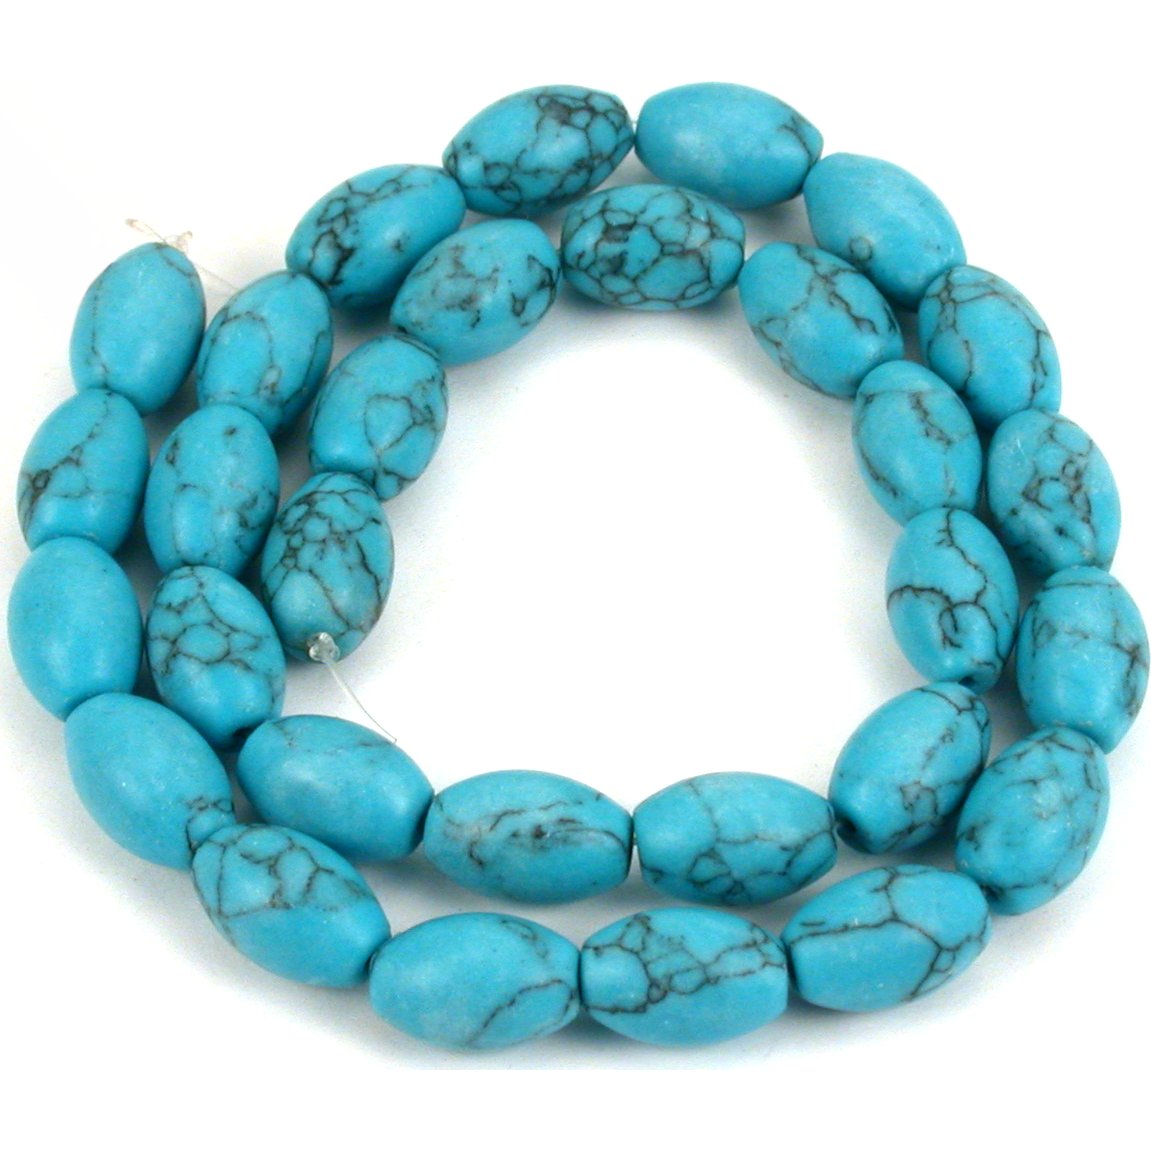 Turquoise Matrix Synthetic Cube Beads 7.5mm 1 Strand